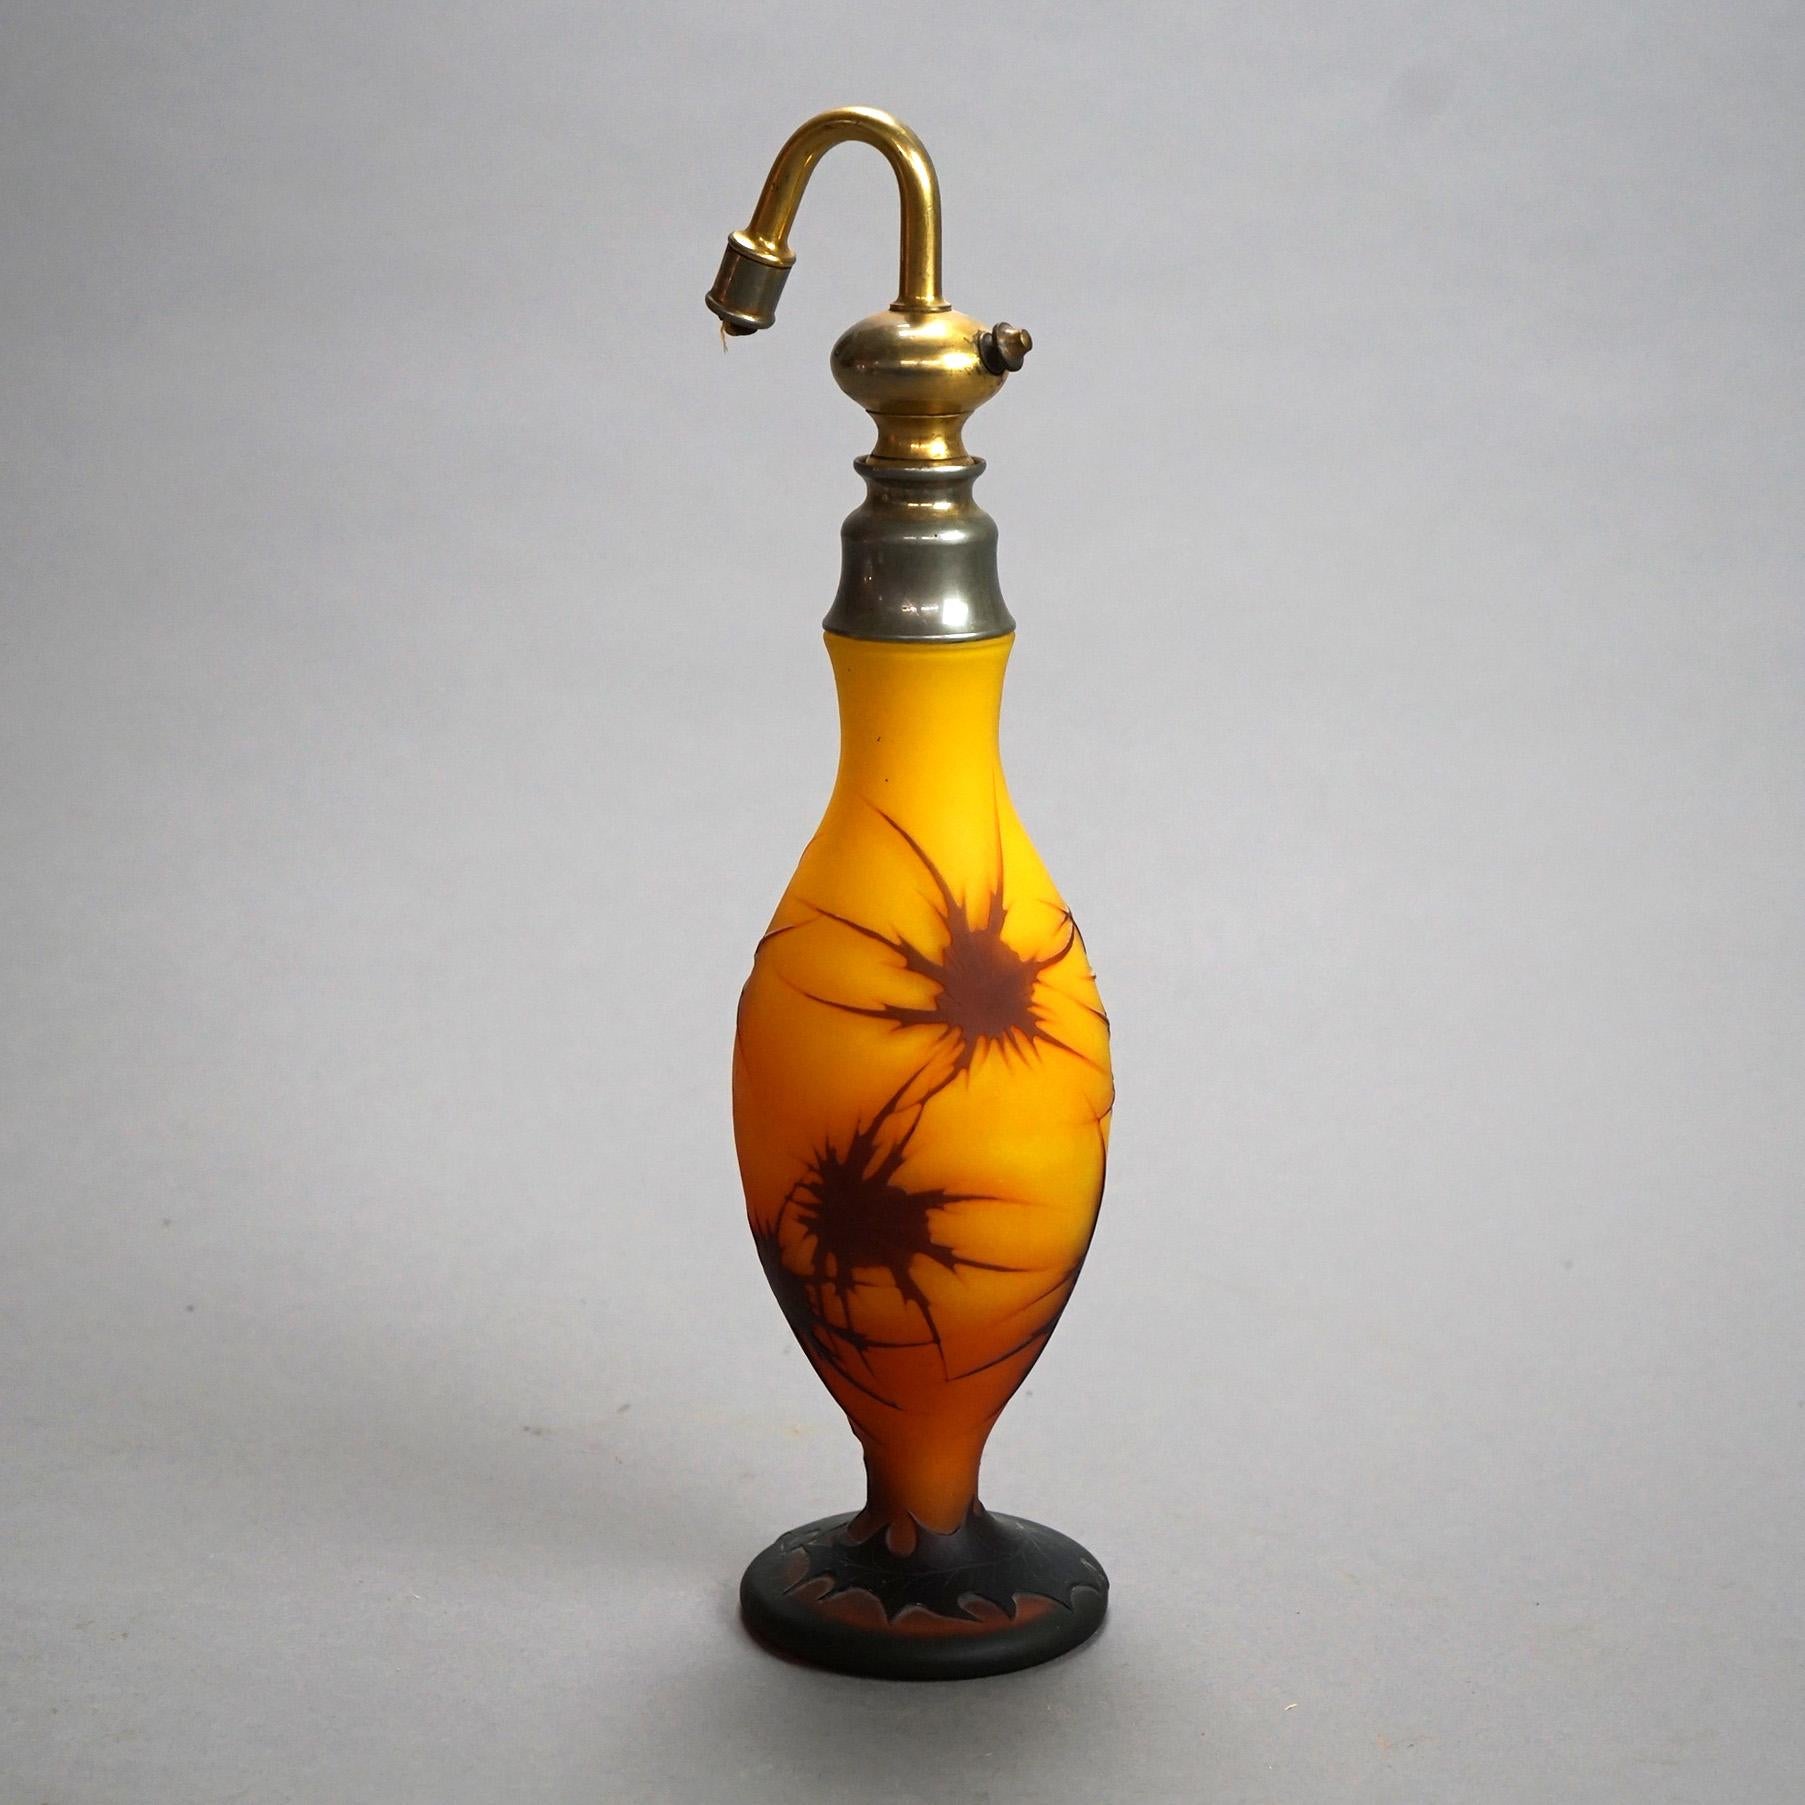 An antique Art Nouveau French perfume atomizer offers art glass construction with cameo cutback stylized floral design, c1920

Measures - 11.25